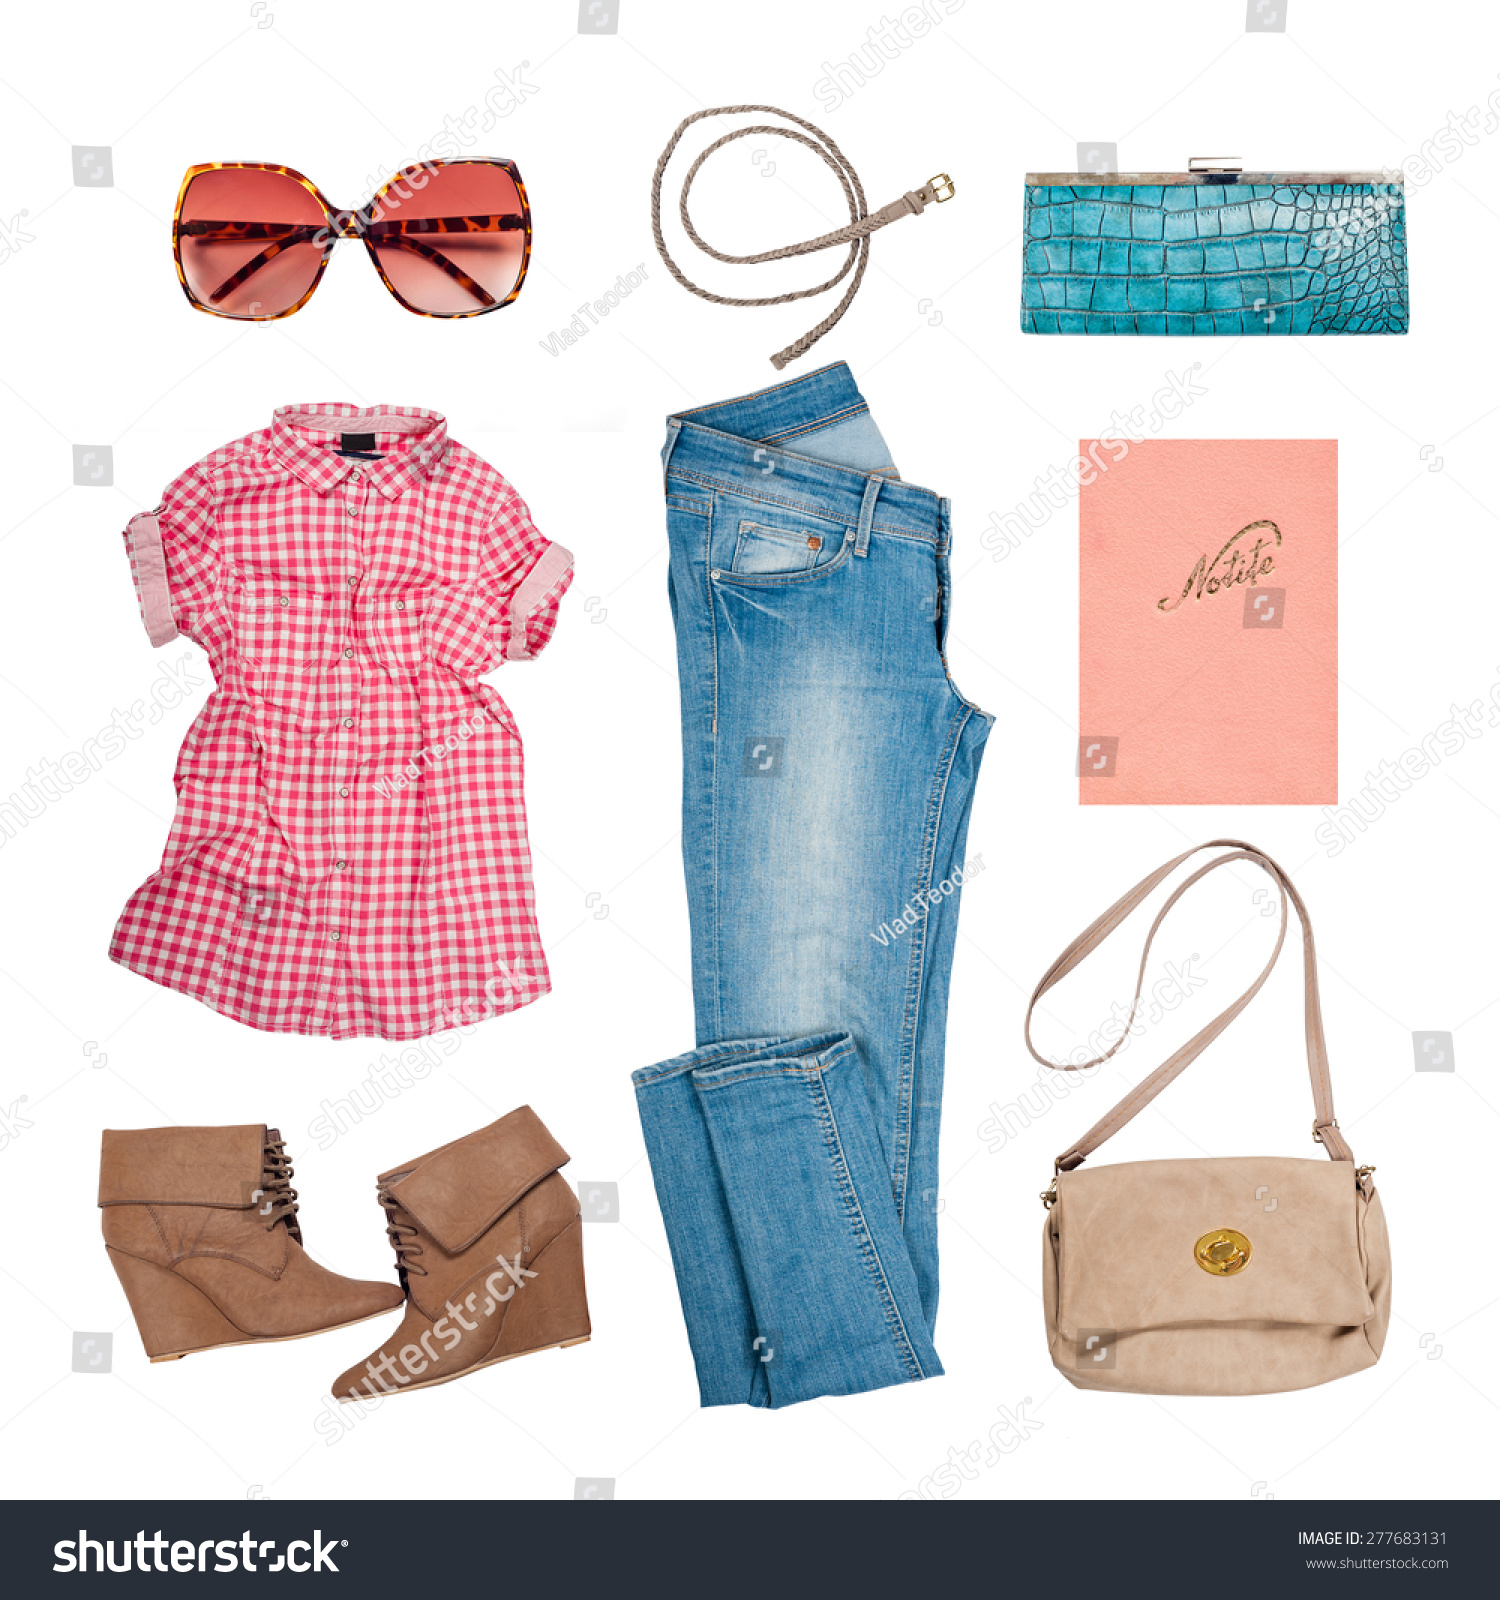 Outfit Clothes Woman Accessories Stock Photo 277683131 - Shutterstock